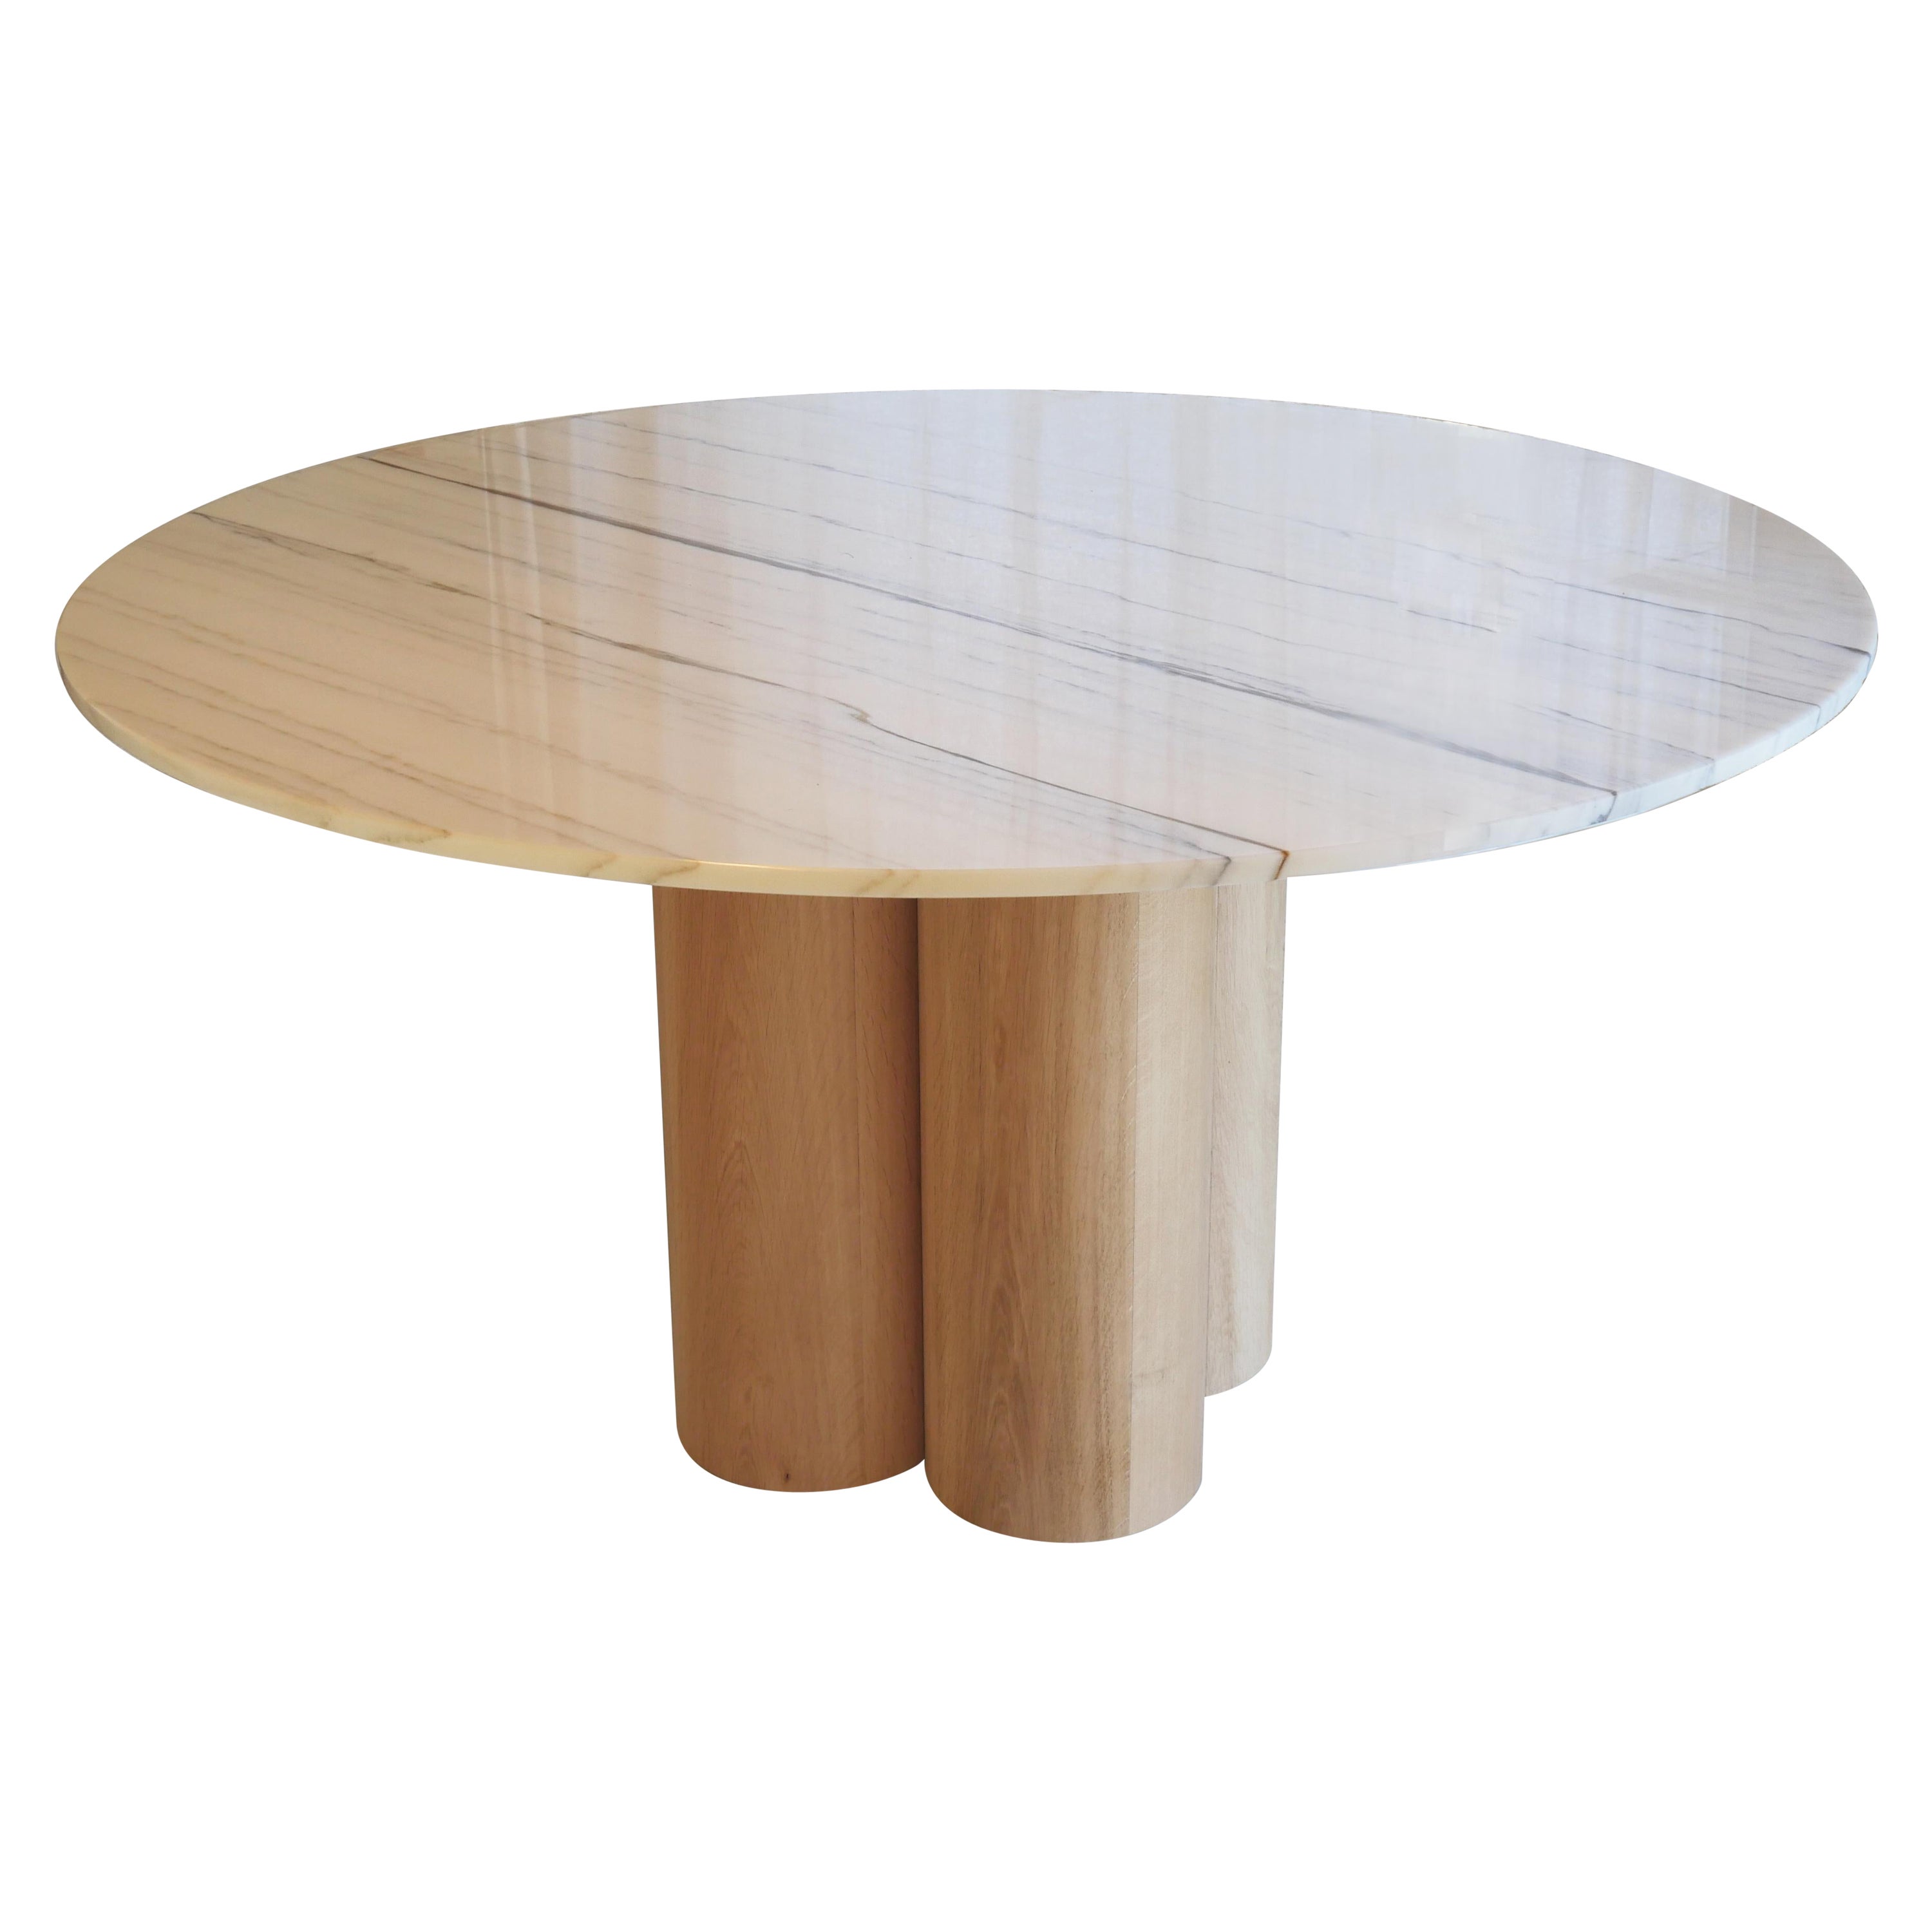 White Marble & Wood Round Table Axis, customizable dimensions, by Sergio Prieto For Sale